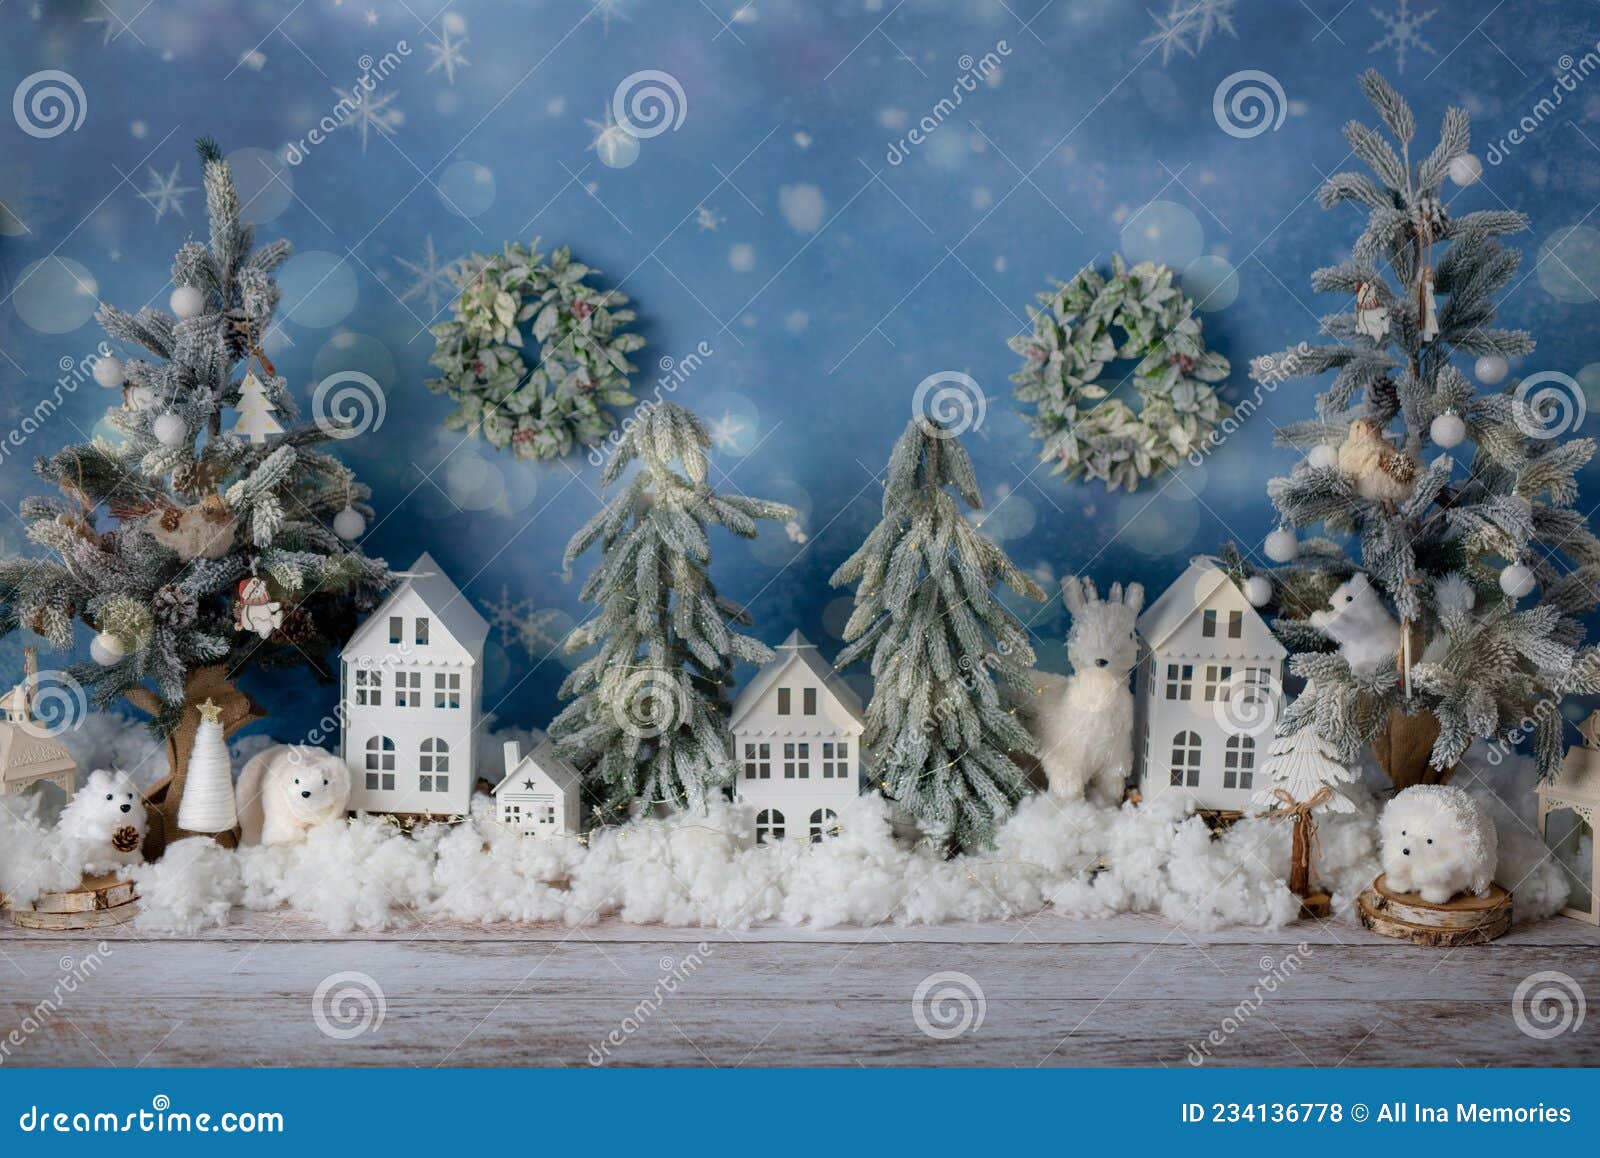 winter diorama with houses and decorations